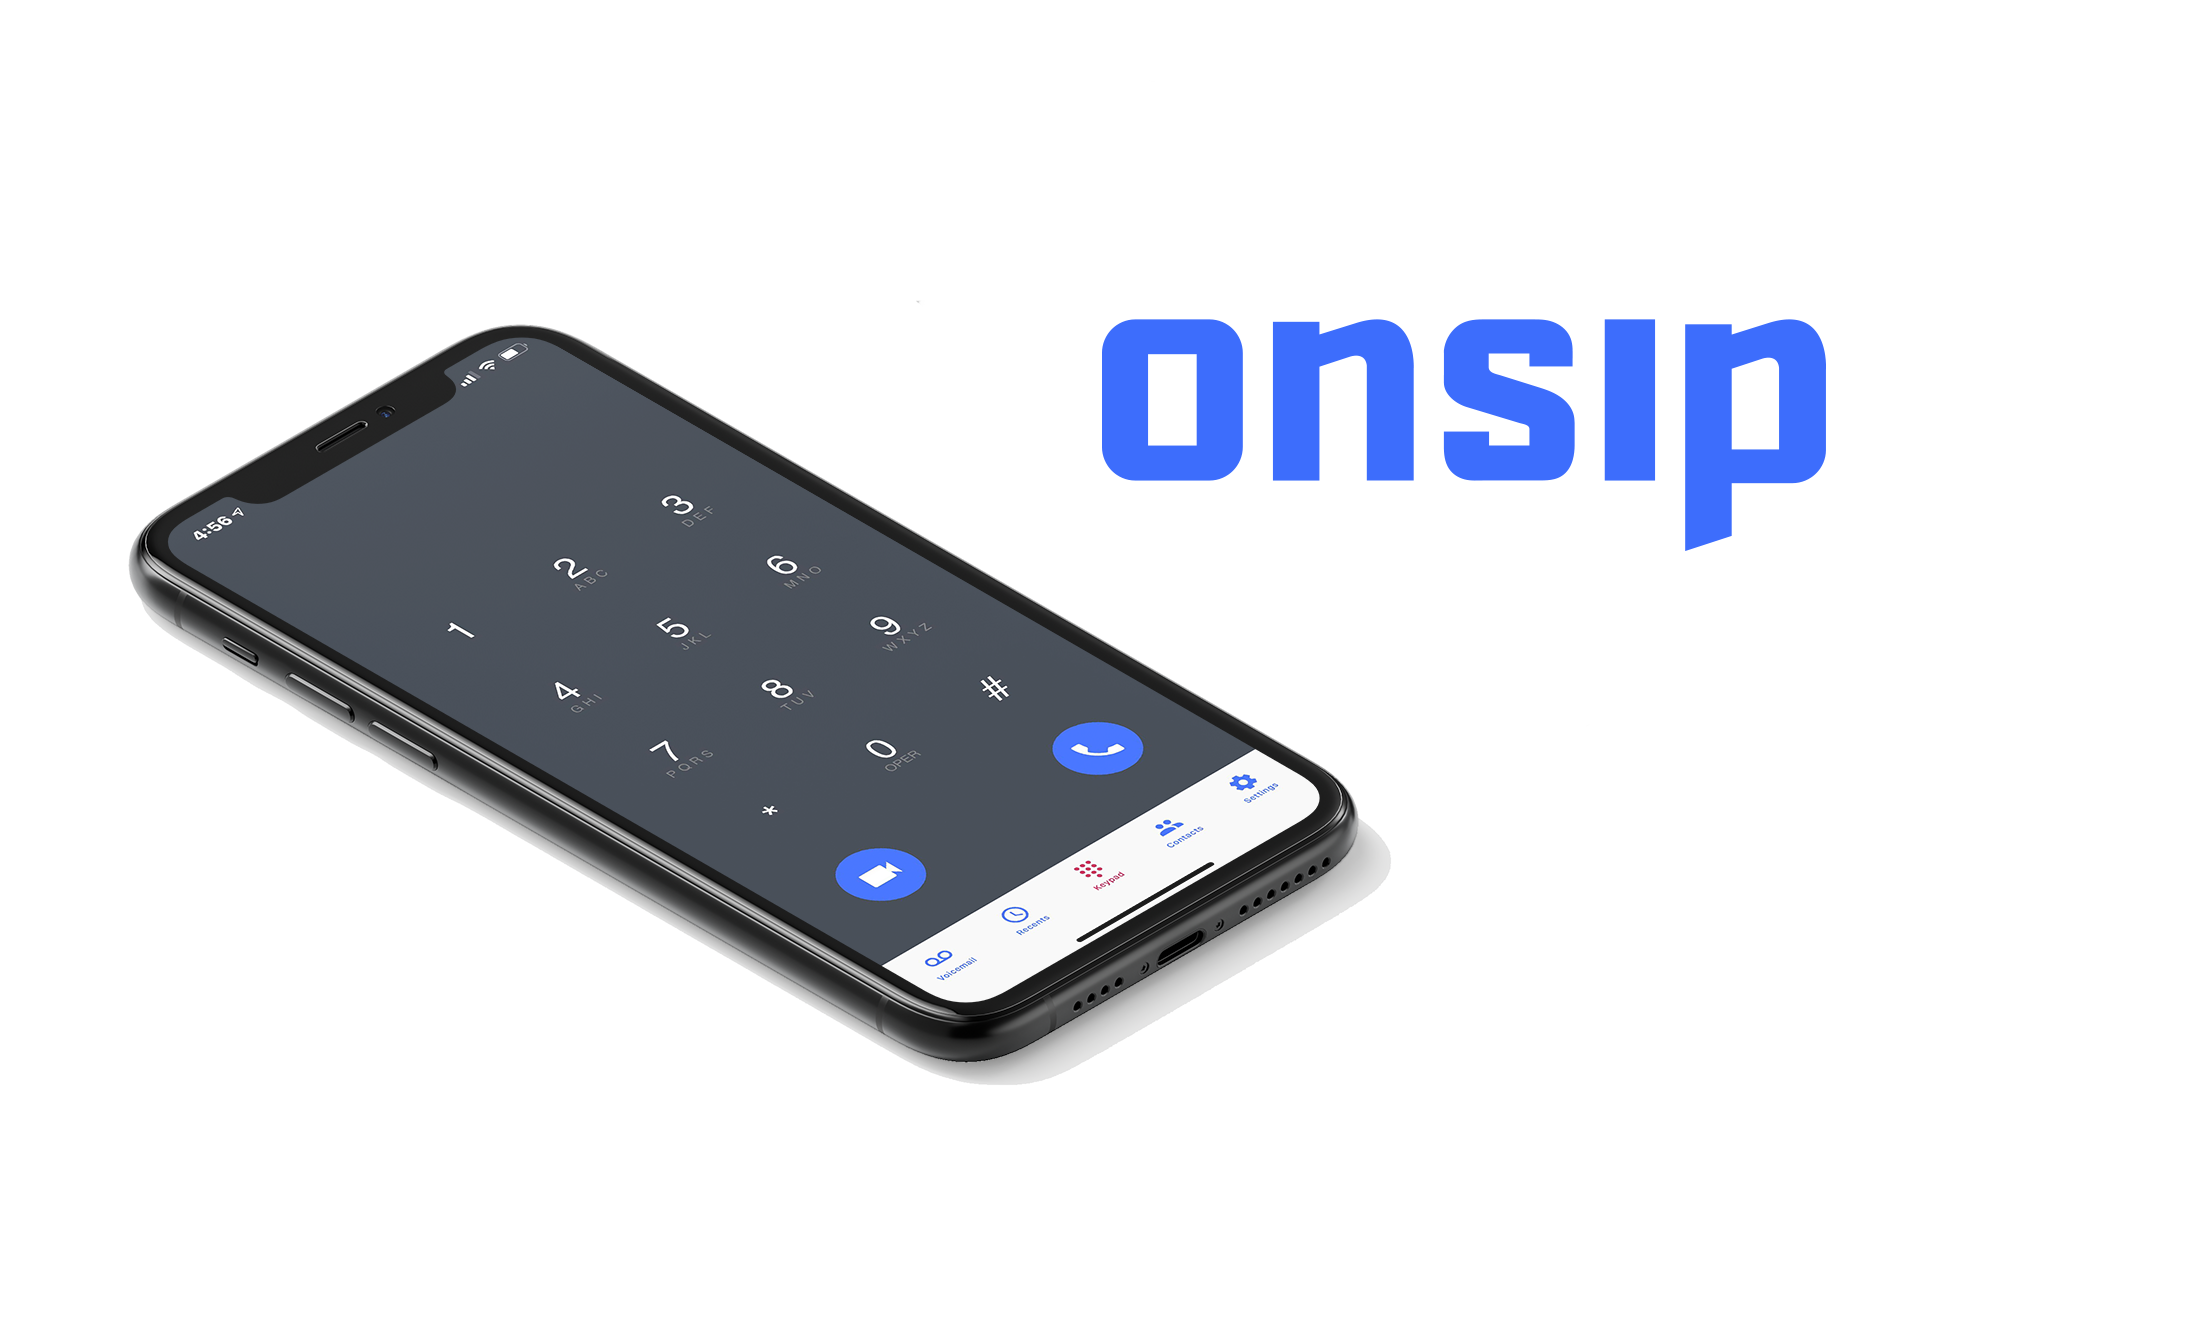 With the OnSIP app, you can easily transfer calls between devices.